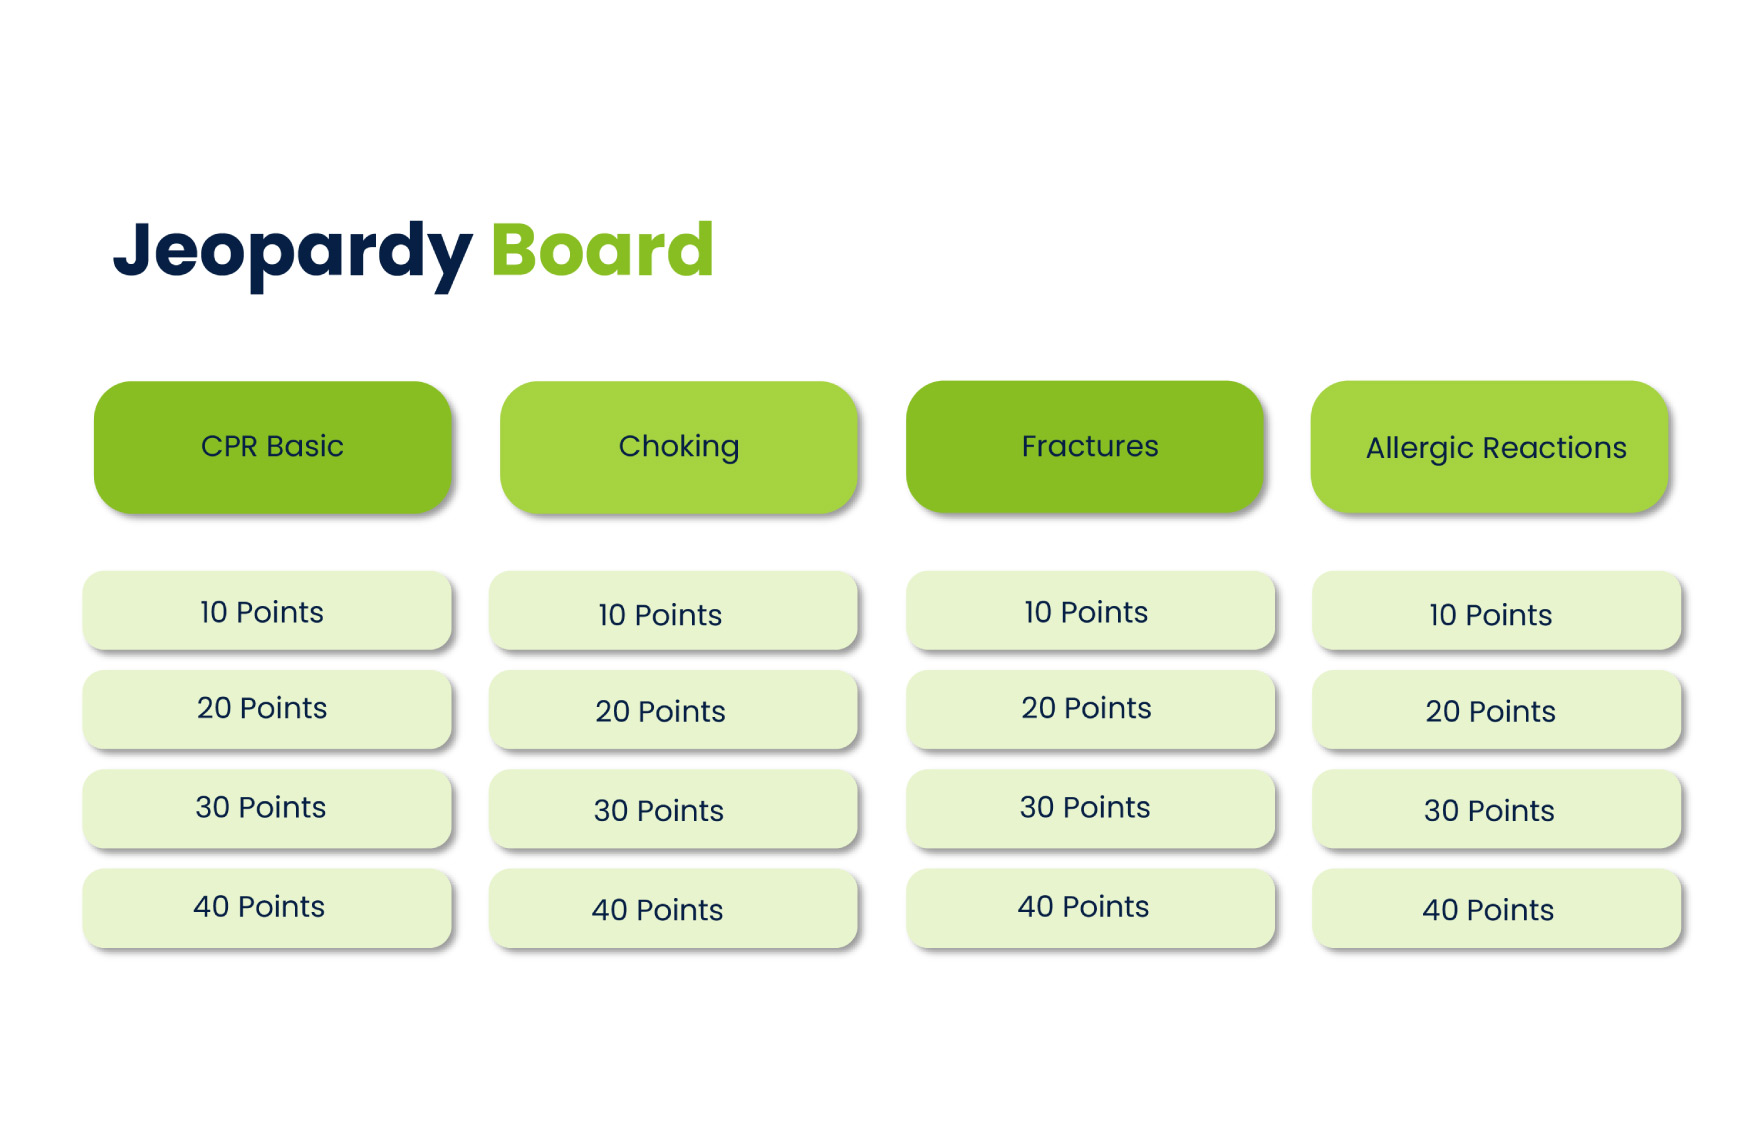 First Aid Jeopardy PPT Template